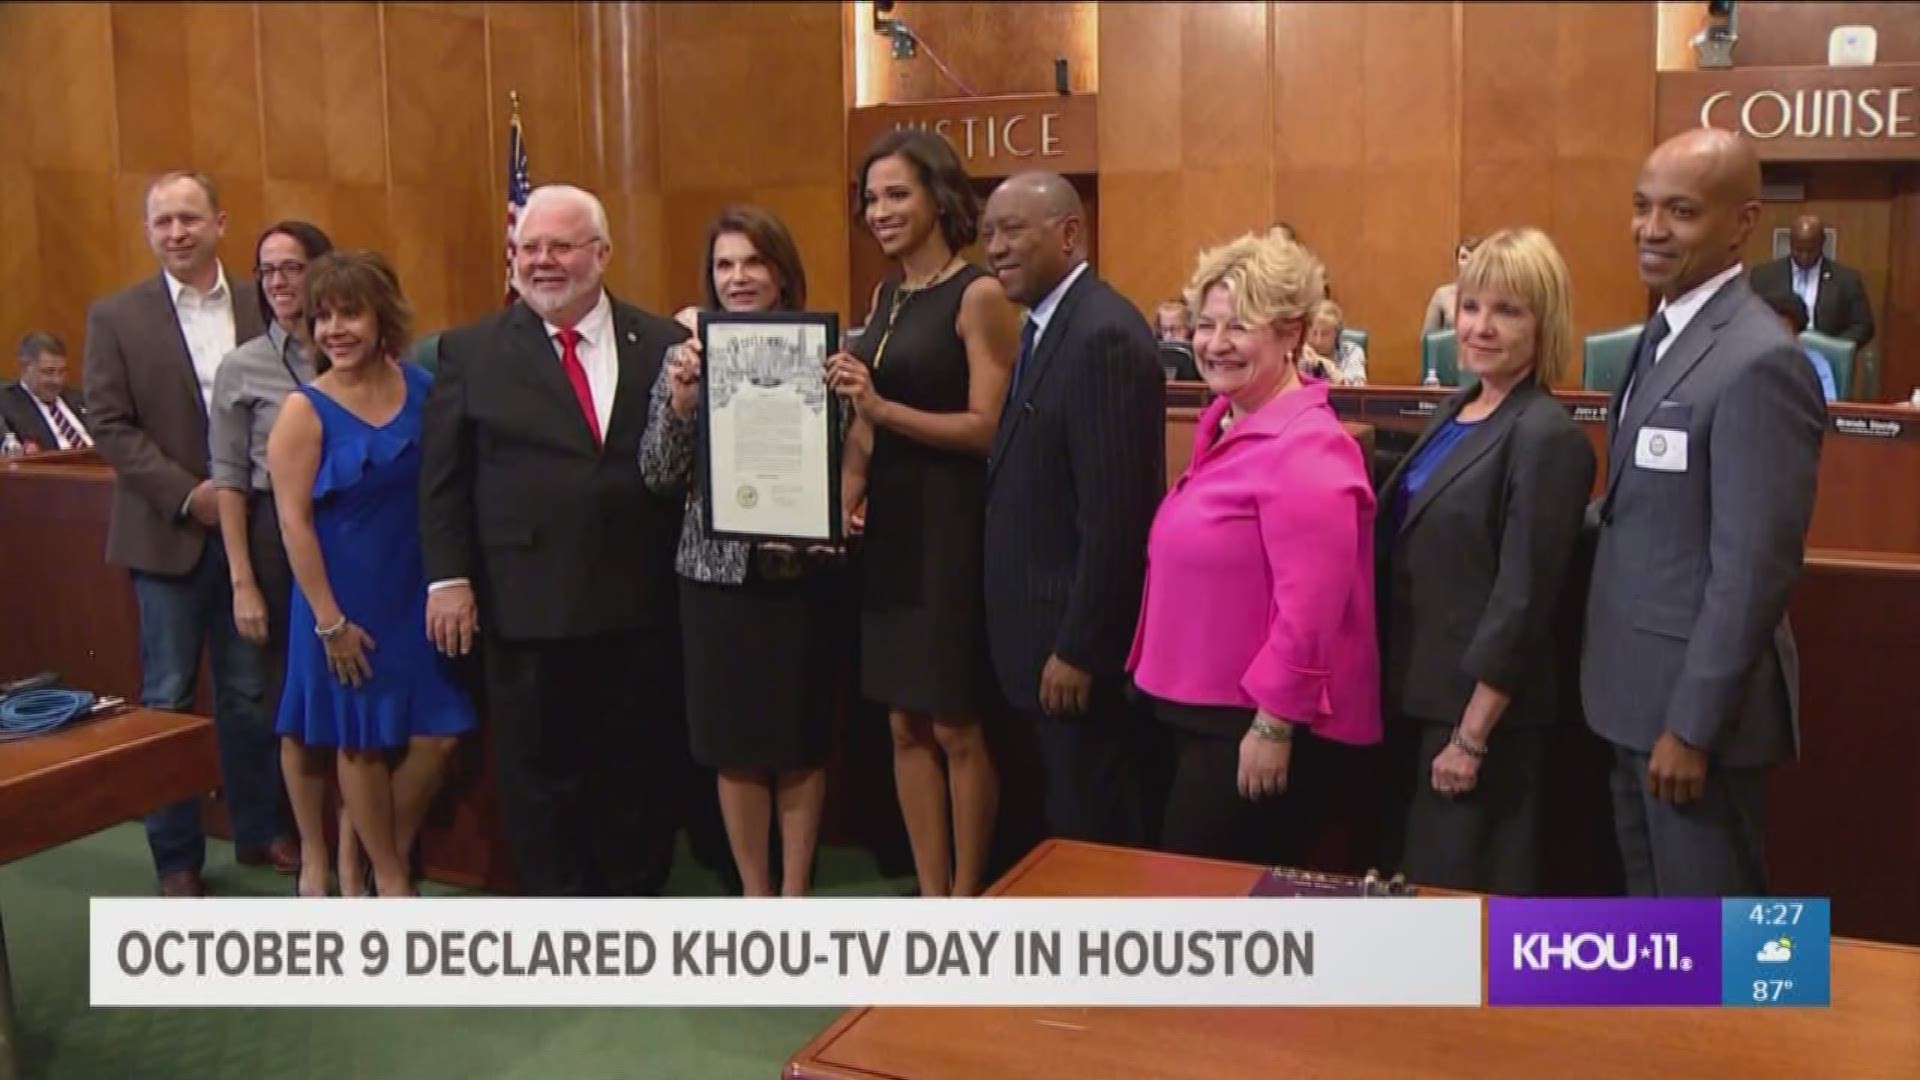 Oct. 9, 2018 was declared "KHOU-TV Day" in the City of Houston.